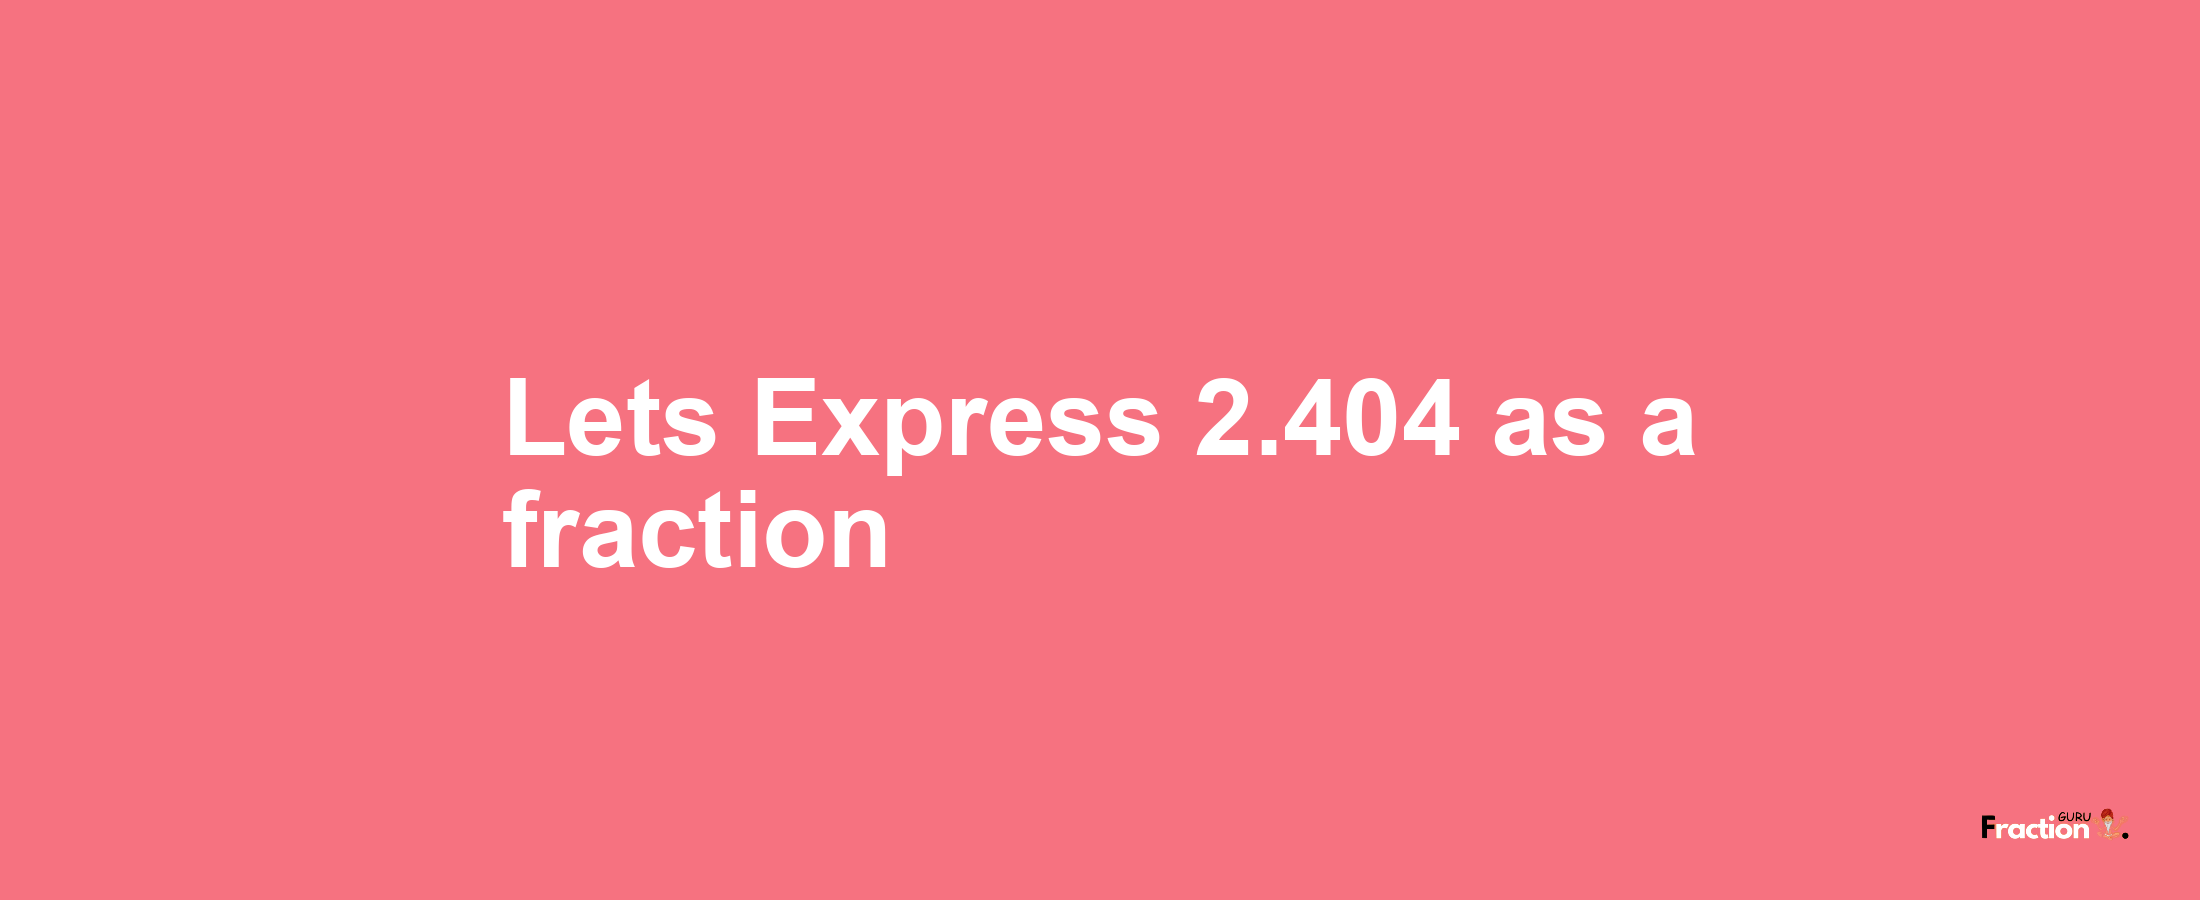 Lets Express 2.404 as afraction